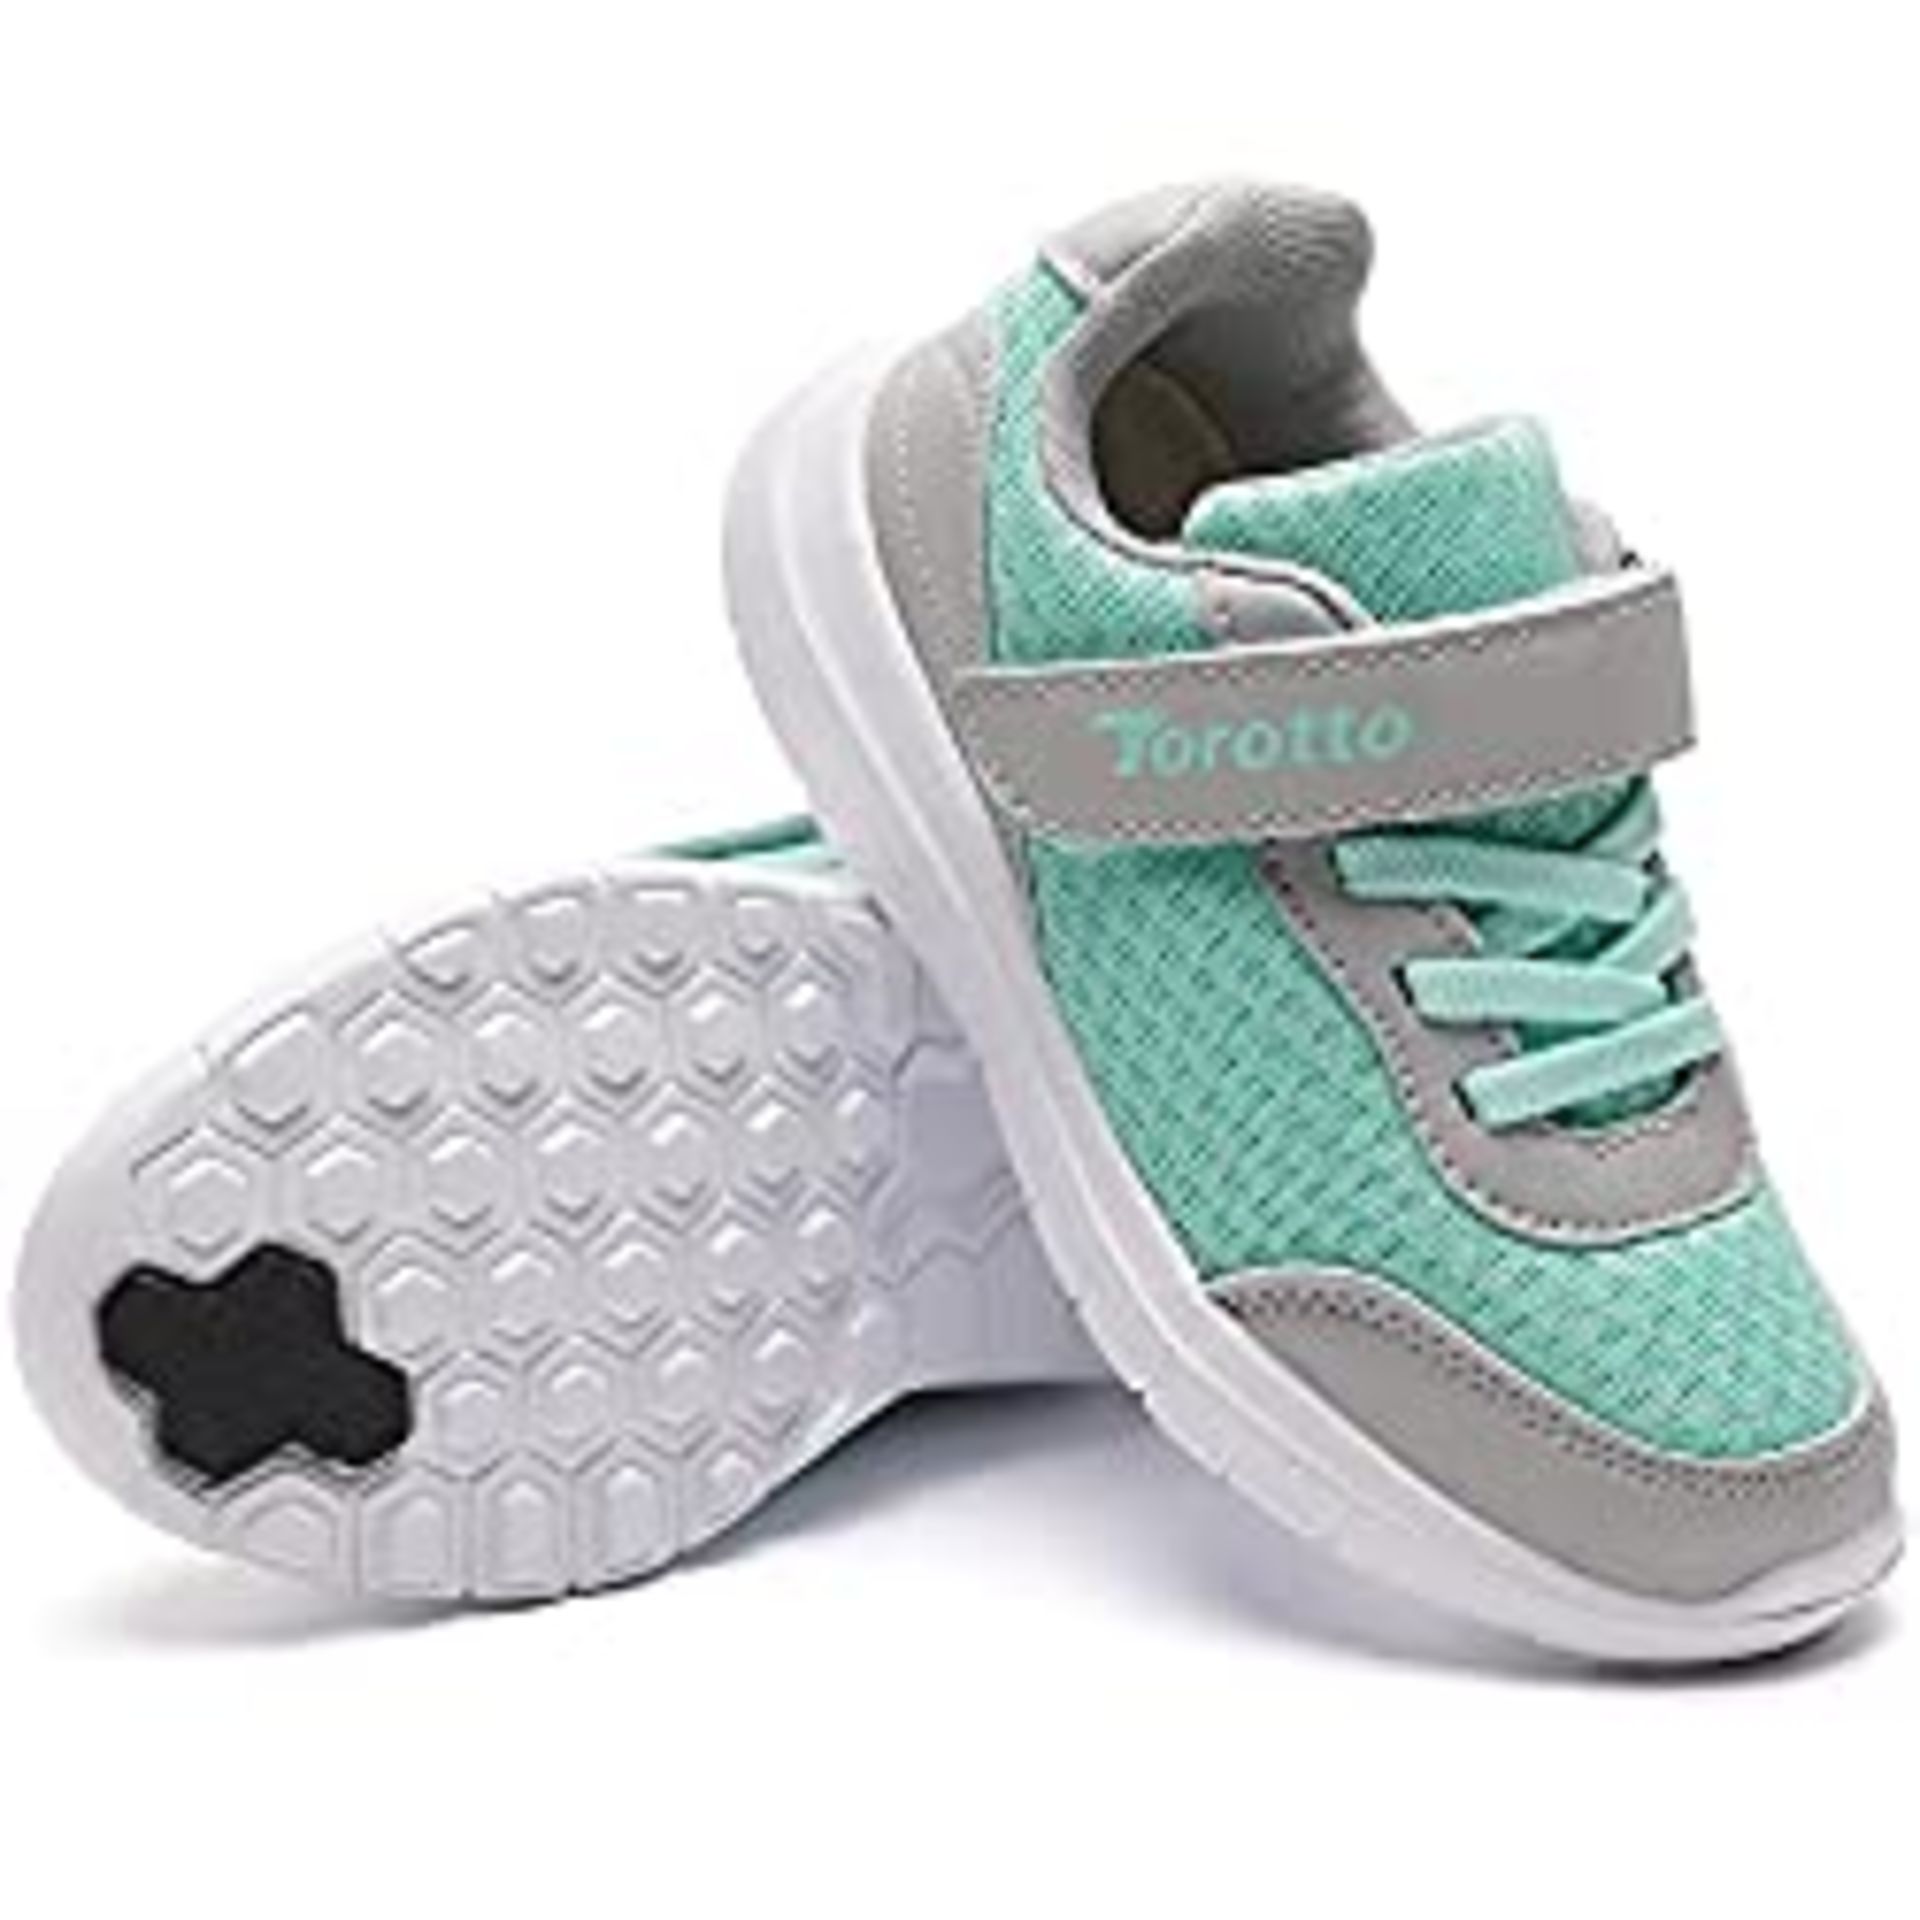 RRP £11.15 BRAND NEW STOCK Torotto Boys Trainers Kids Sneakers Athletic Casual